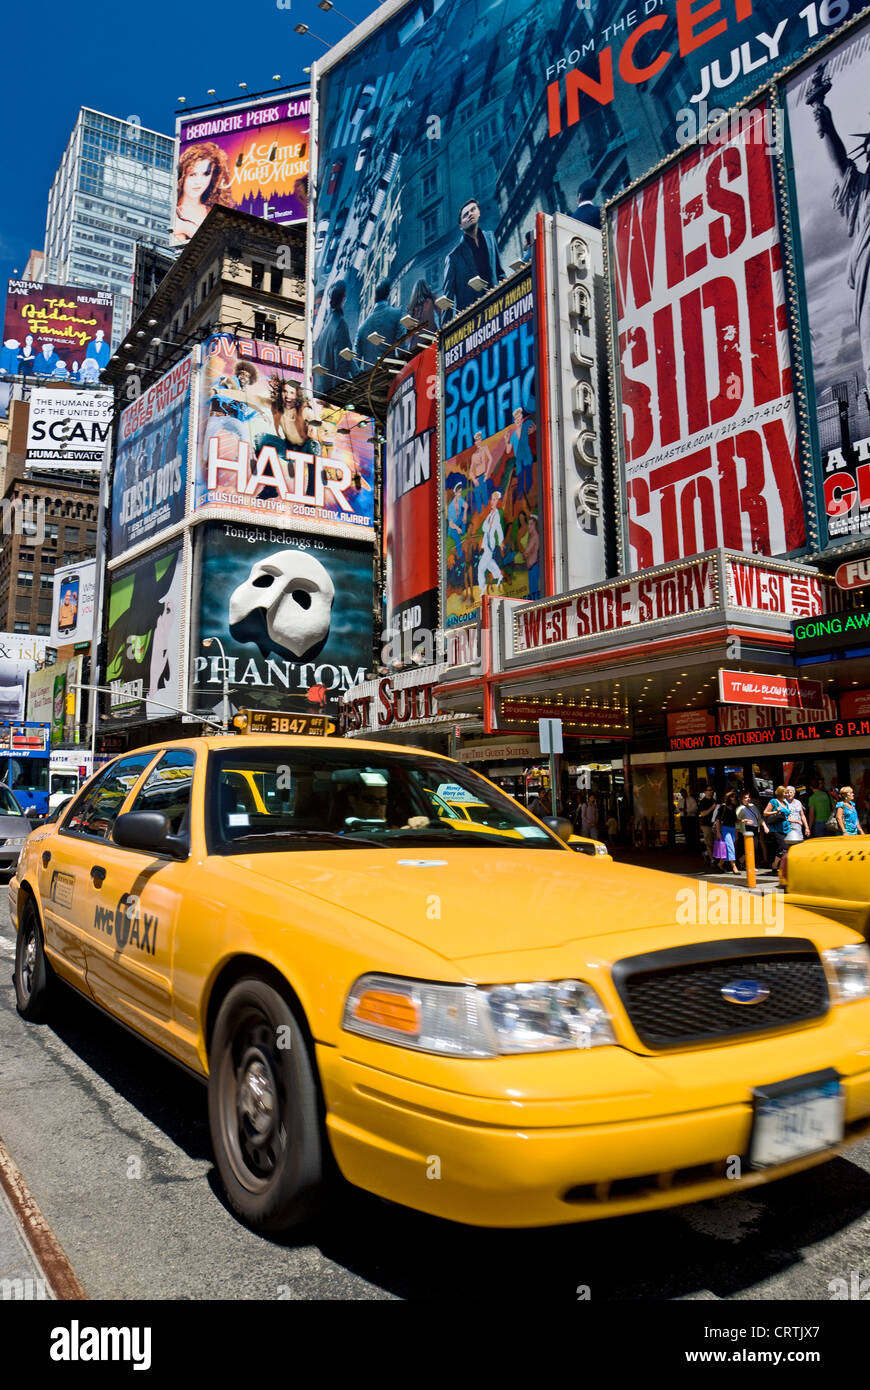 Taxi New York Times Square Yellow Taxi, New York City Daytime Broadway Theater Billboards and Yellow Taxis Stock Photo